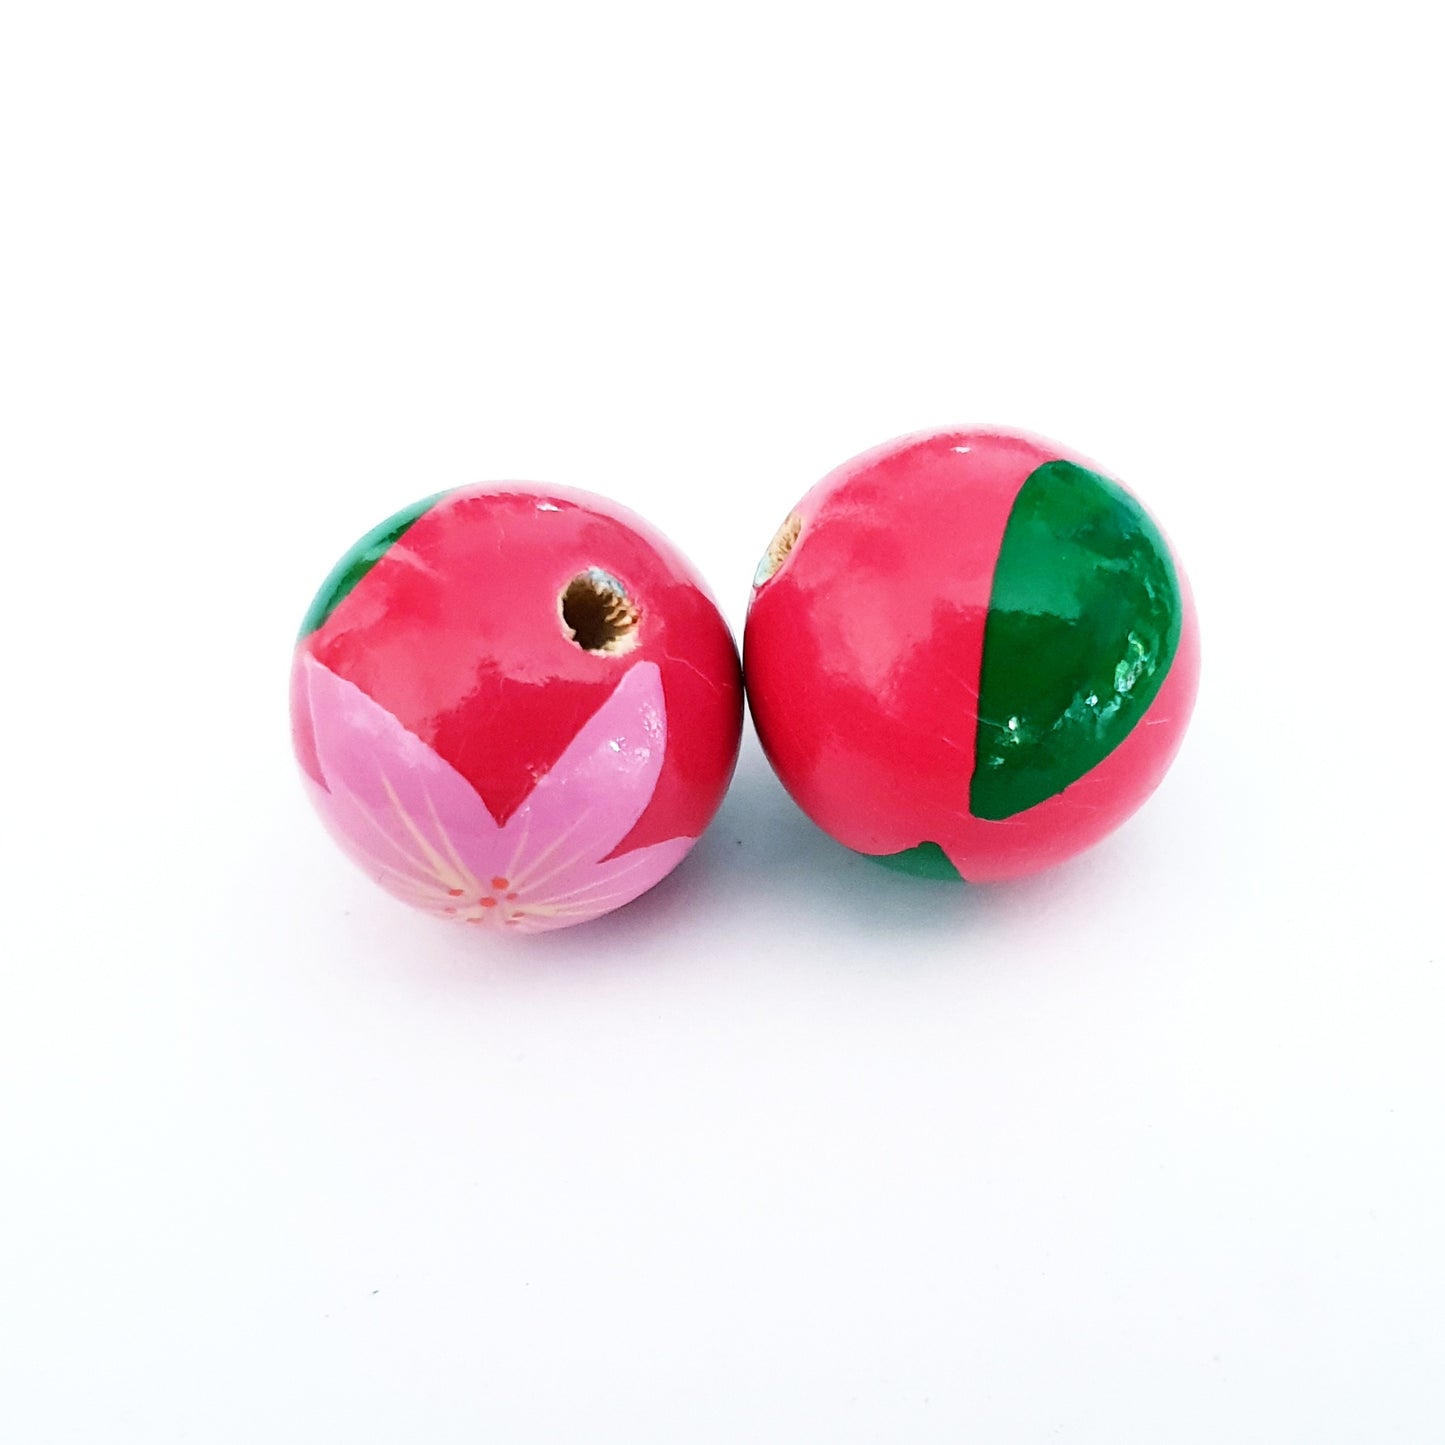 Wooden Painted Bead Floral Design 20mm Hot Pink